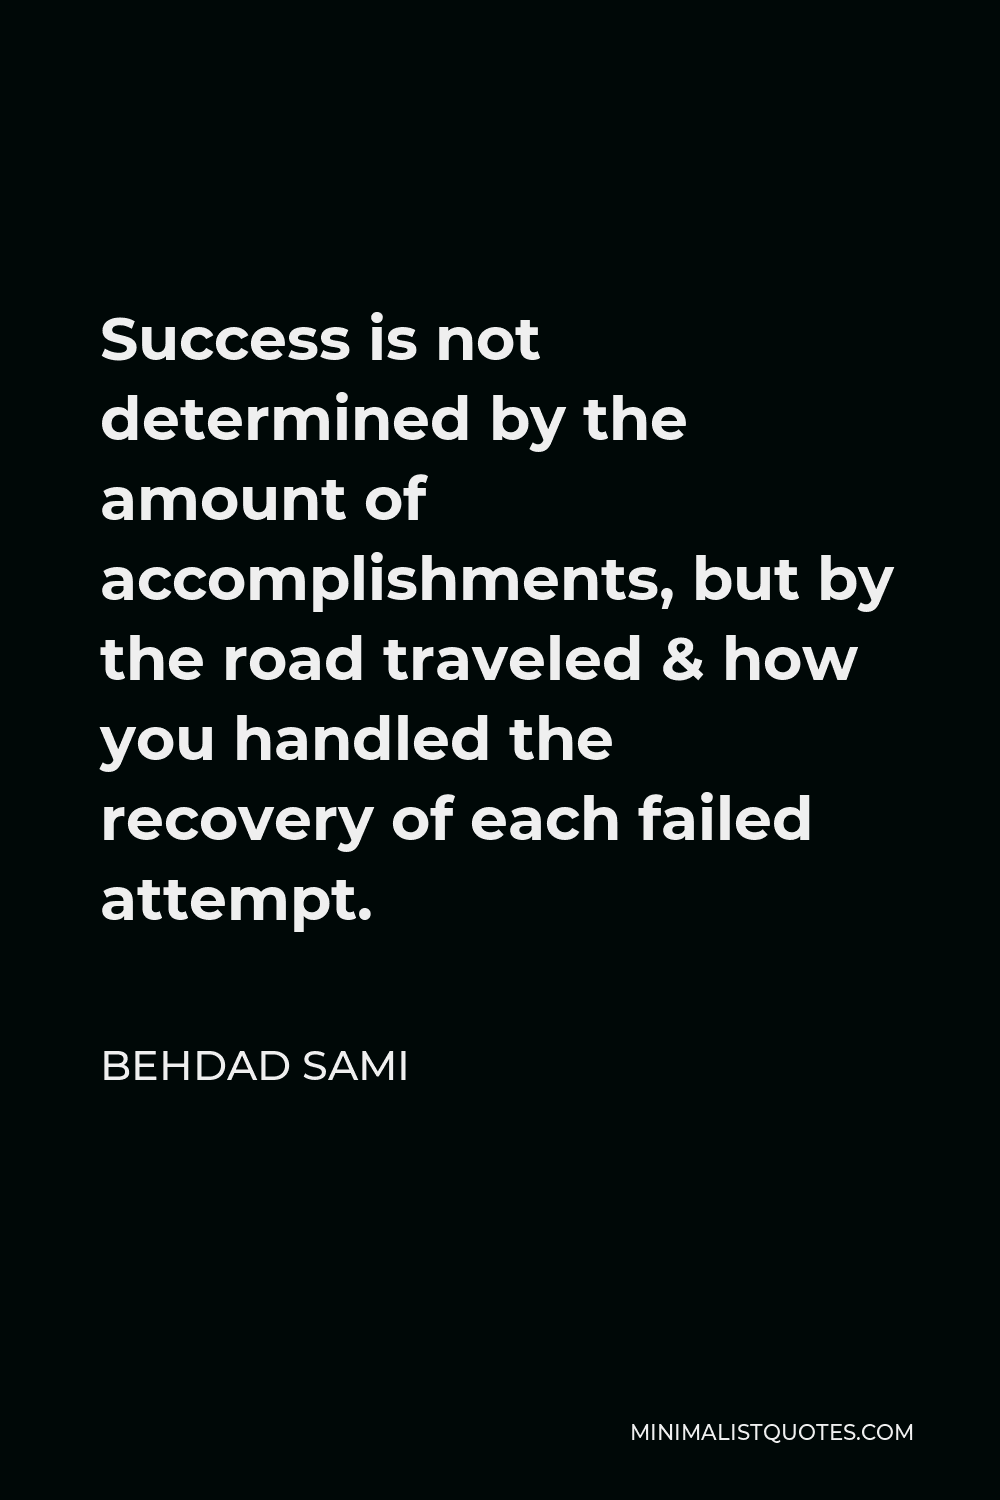 Behdad Sami Quote - Success is not determined by the amount of accomplishments, but by the road traveled & how you handled the recovery of each failed attempt.